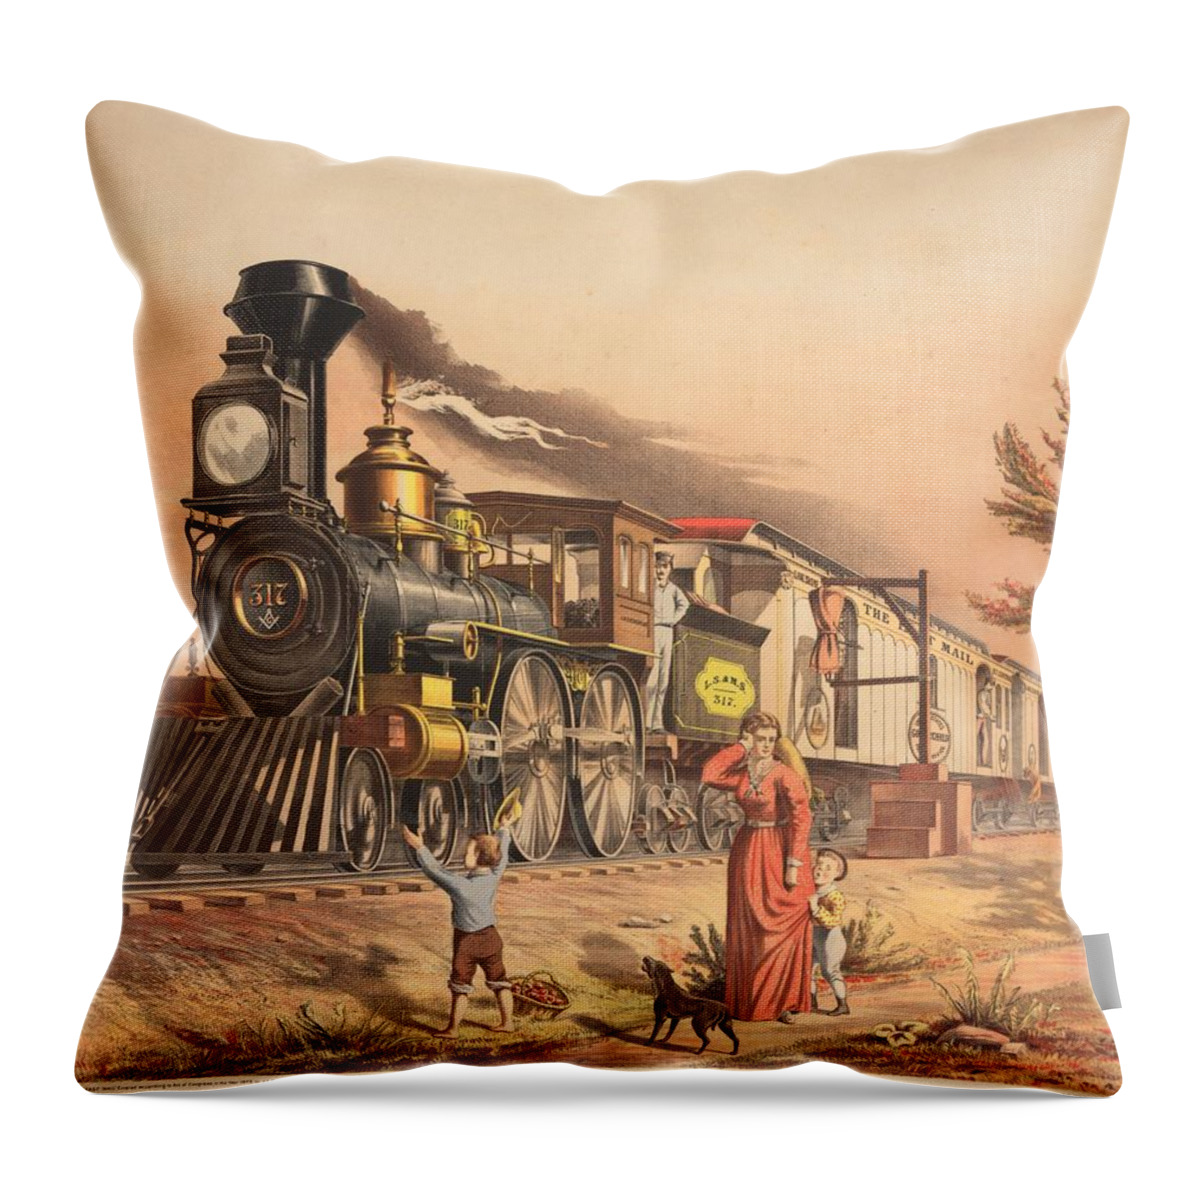 Americana Throw Pillow featuring the digital art 1875 Fast Mail by Kim Kent